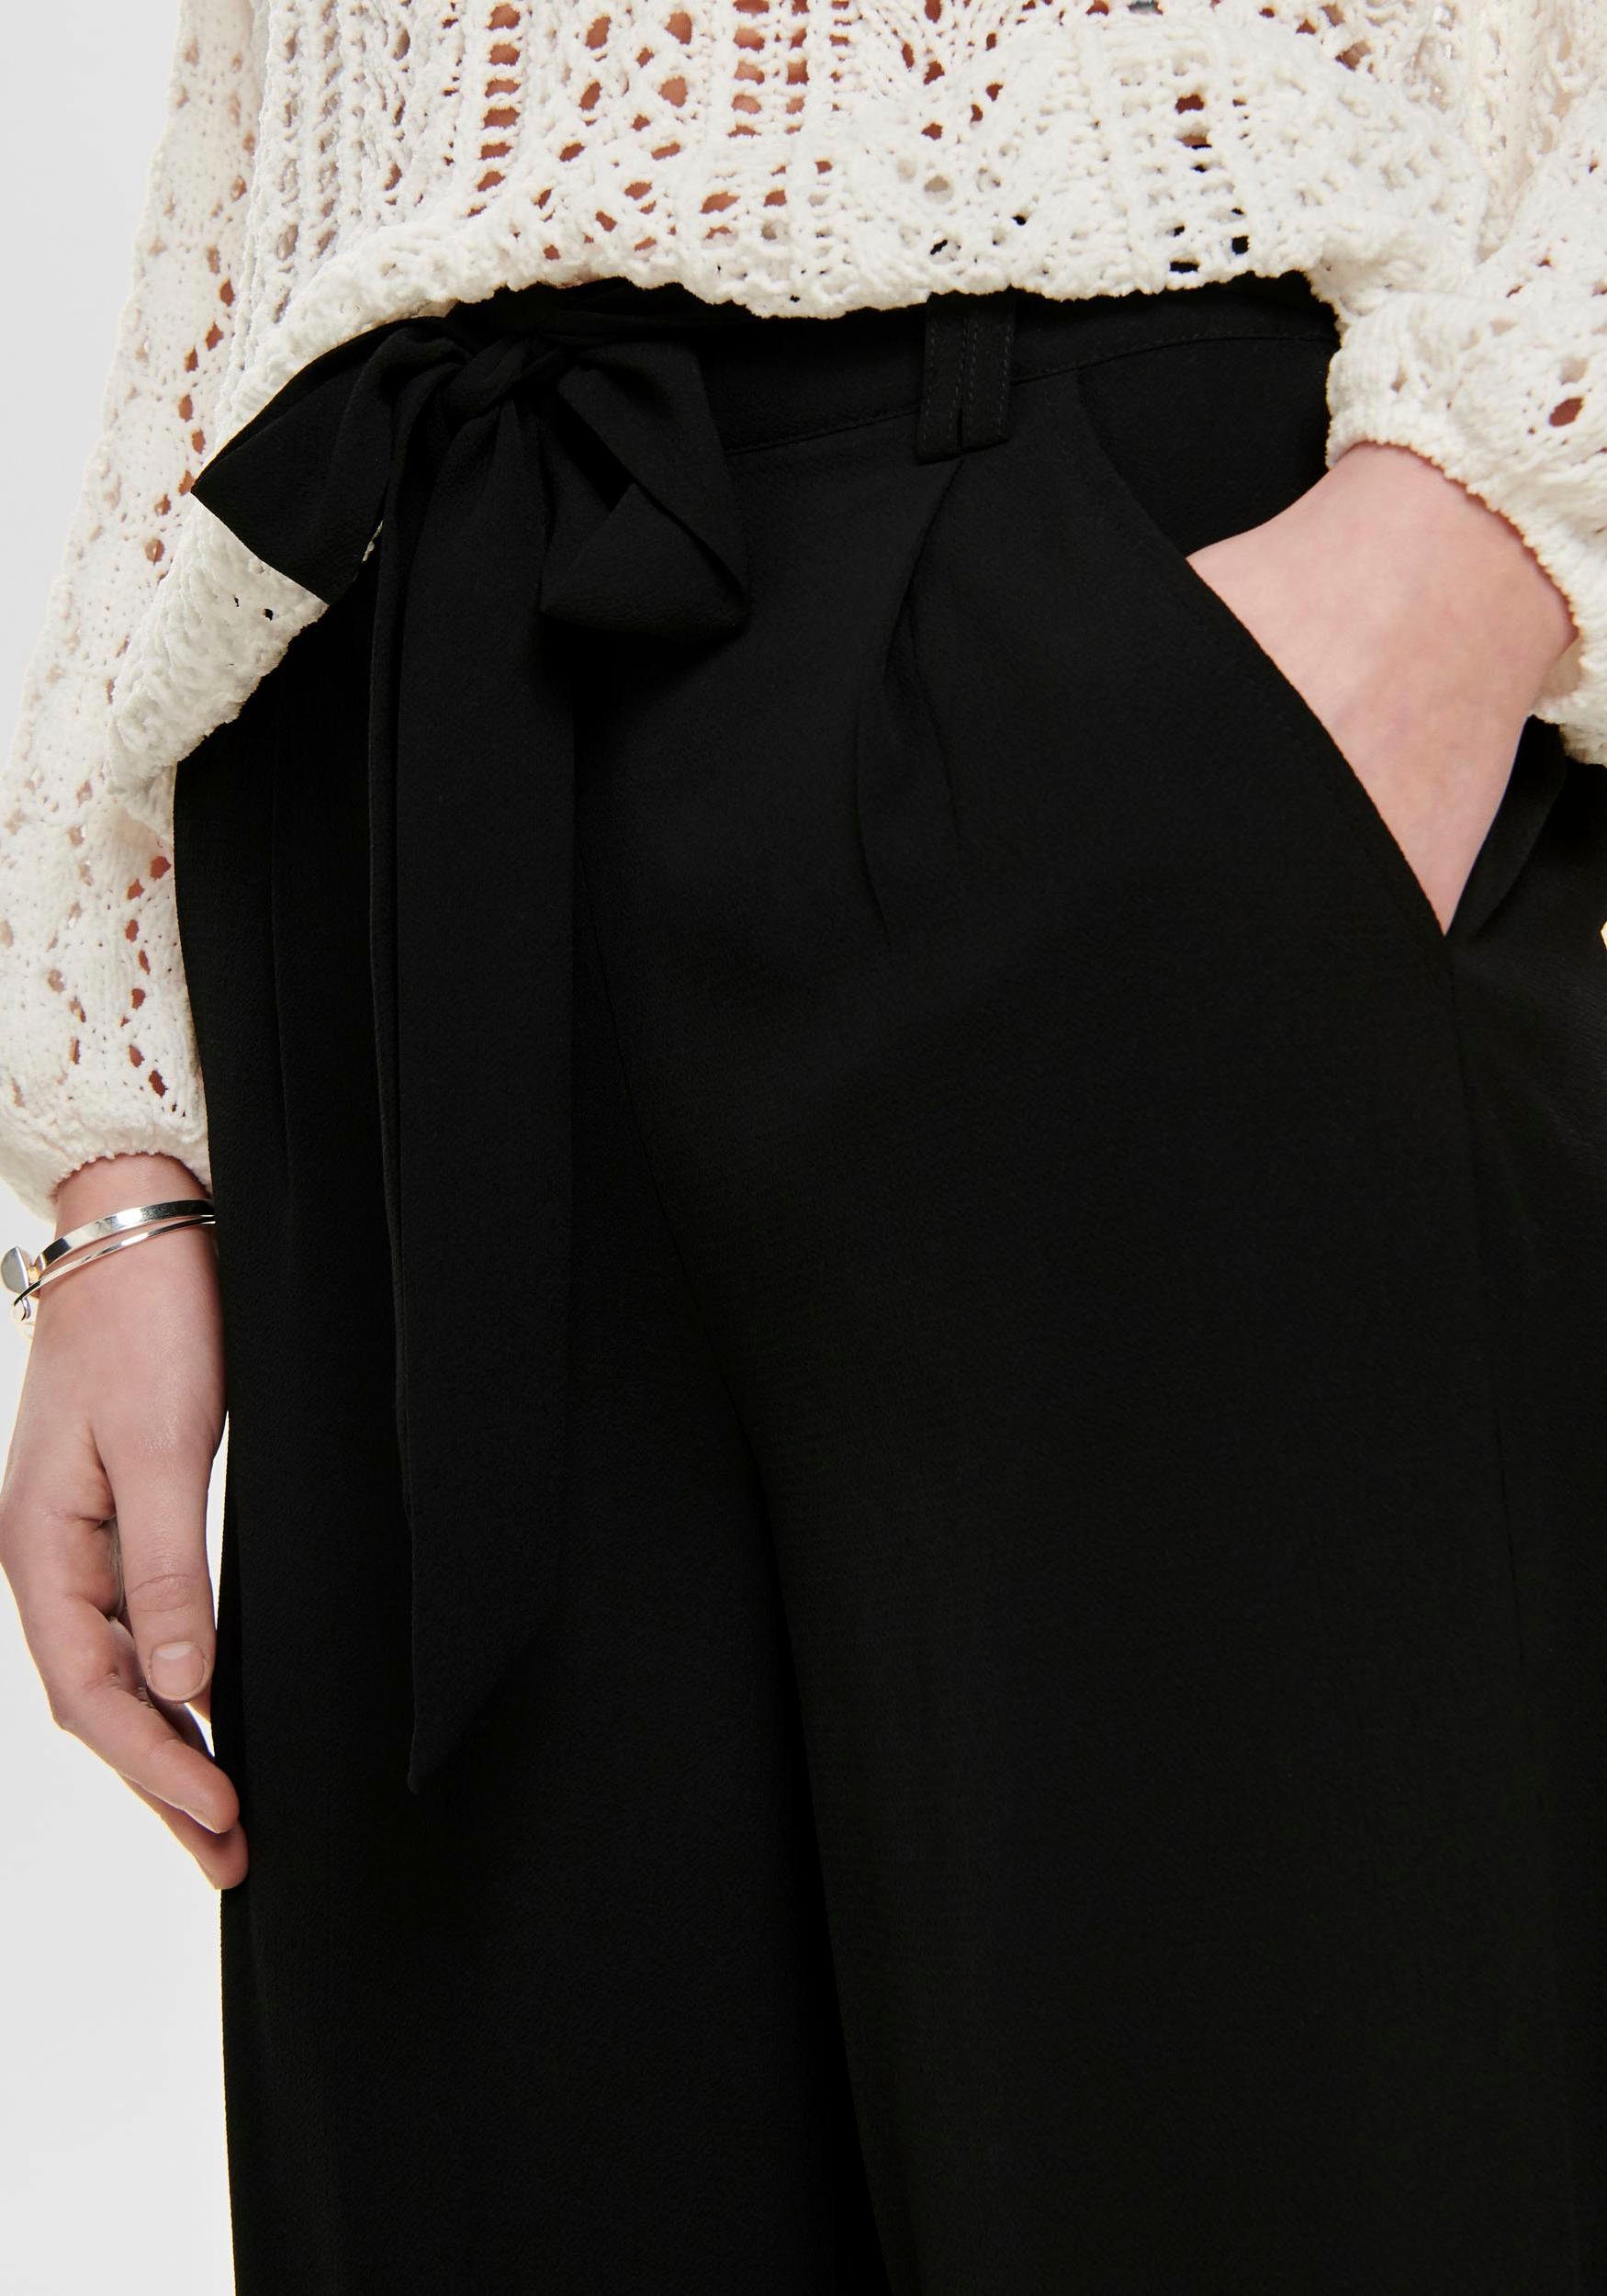 CULOTTE PANT Black NOOS oder gestreiftem PTM uni in PALAZZO Palazzohose ONLY ONLWINNER Design